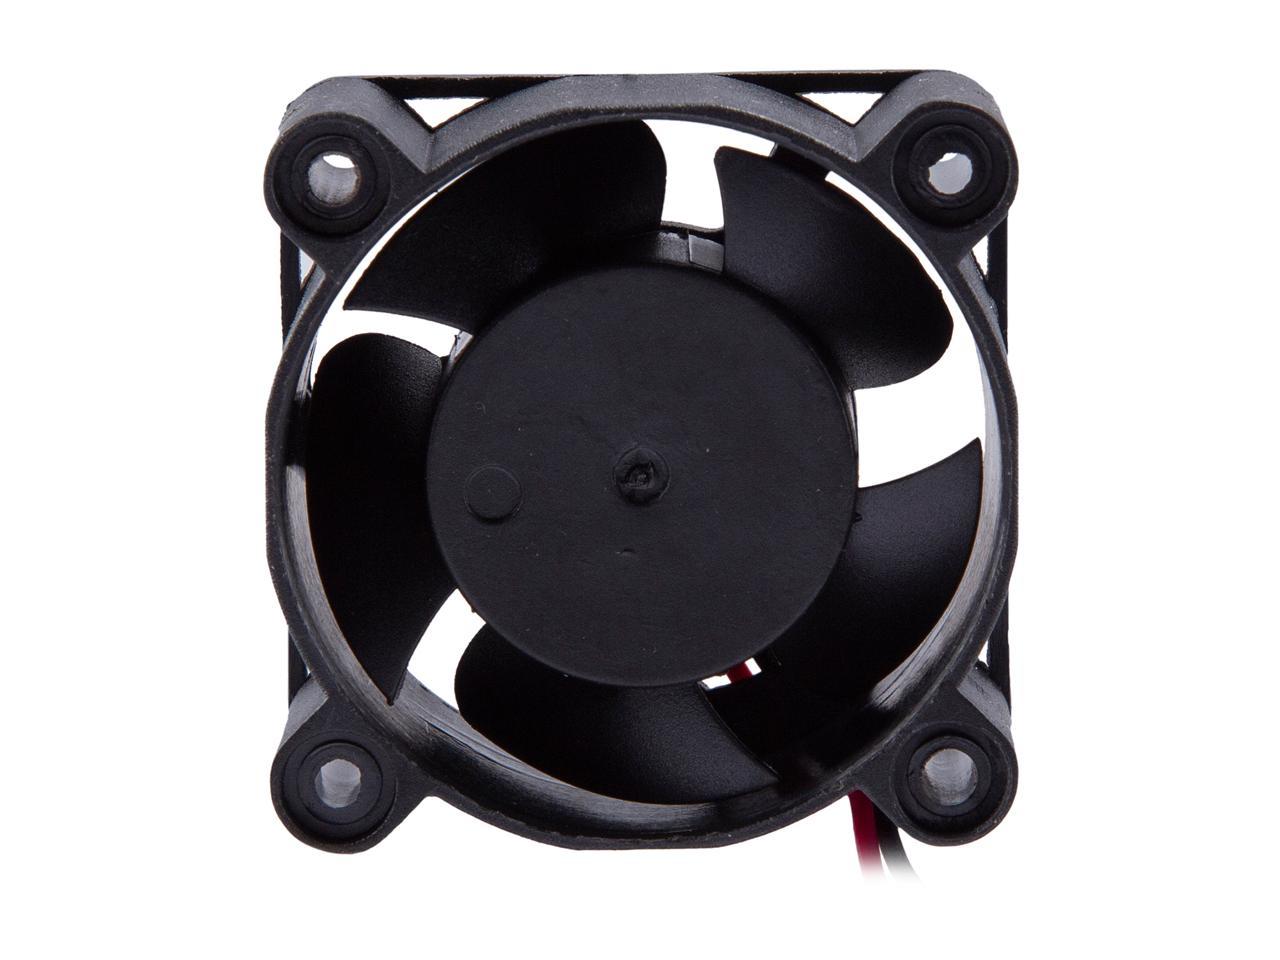 Athena Power FANC-4020S - 40 x 20mm Cooling Fan, 6200 RPM, 7.10 CFM, 28 dBA, 3pin Fan Connector, Compatible with 1U Chassis